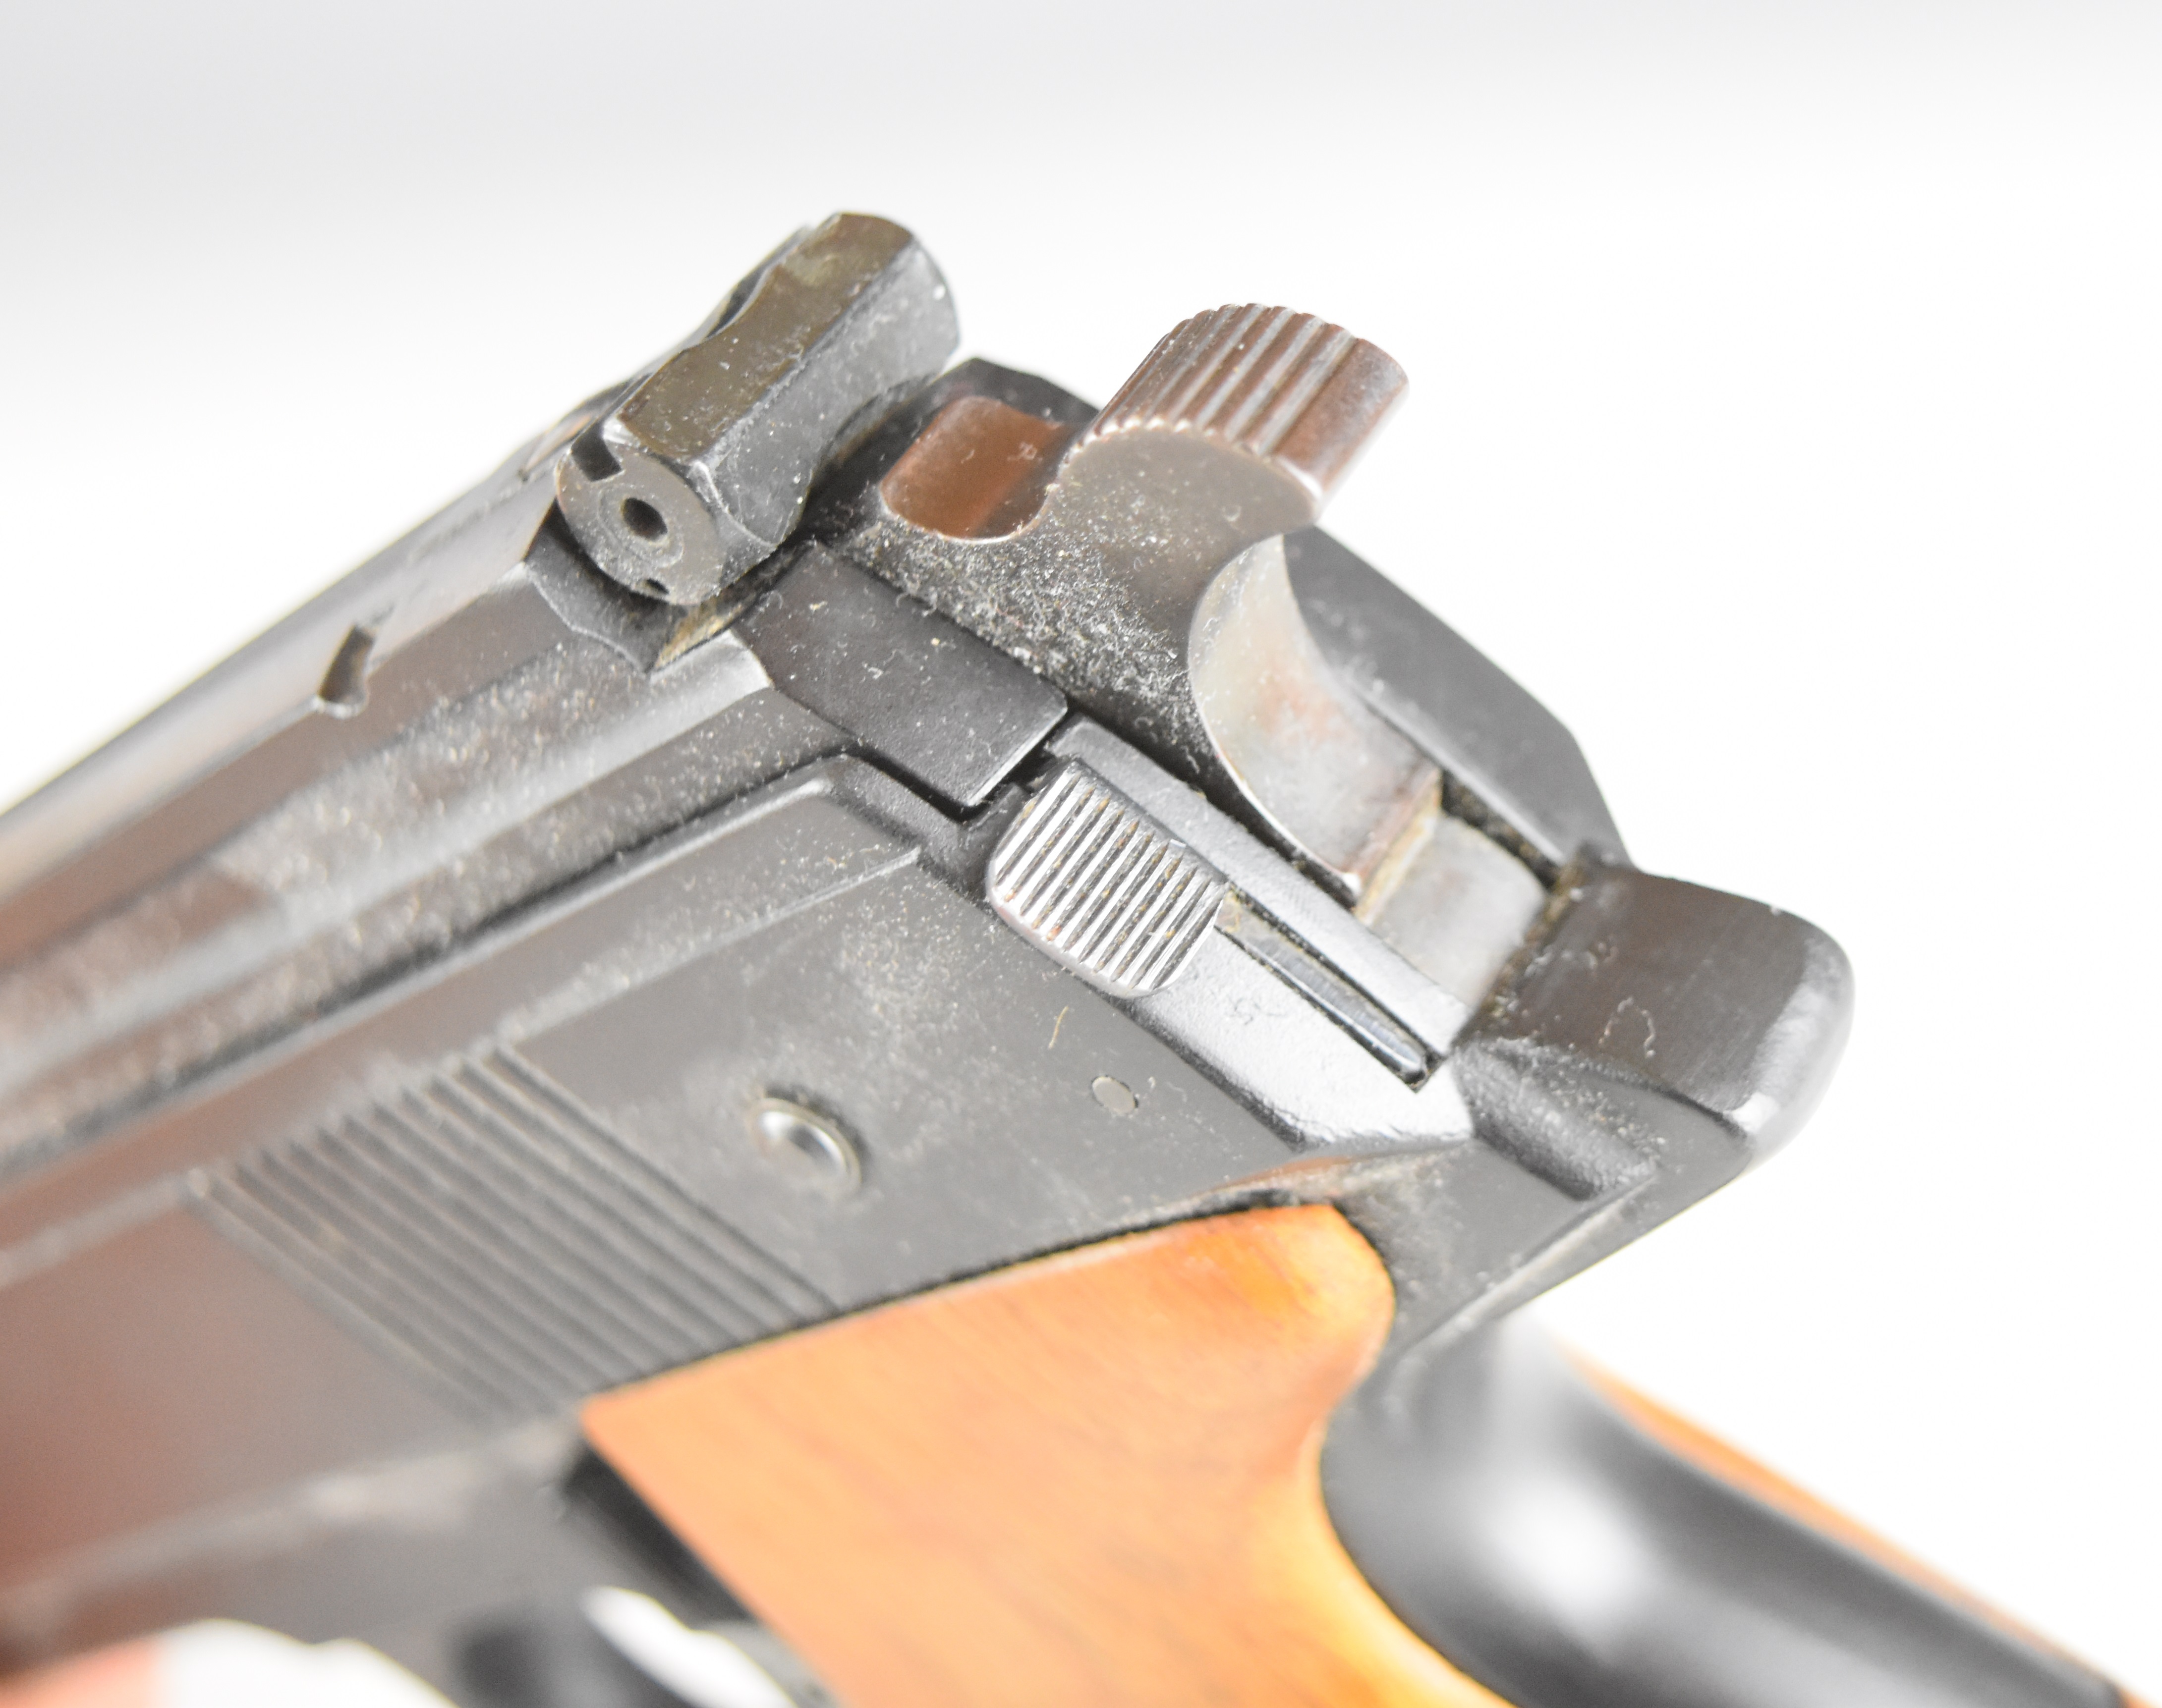 Weihrauch HW75 .177 air pistol with shaped and textured wooden grips and adjustable sights and - Image 8 of 12